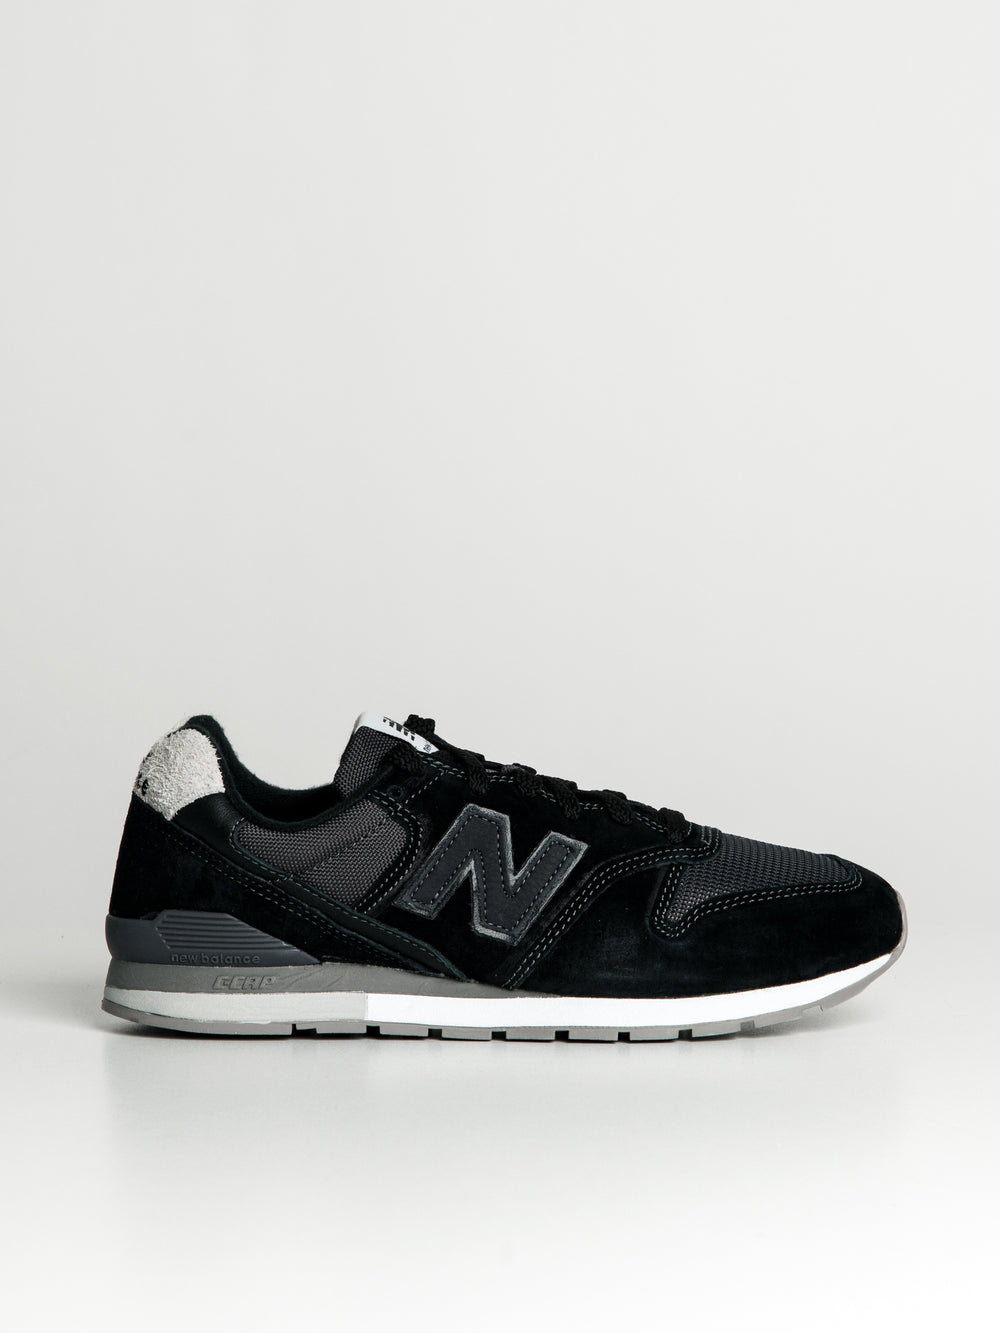 MENS NEW BALANCE THE 996 SNEAKER - CLEARANCE